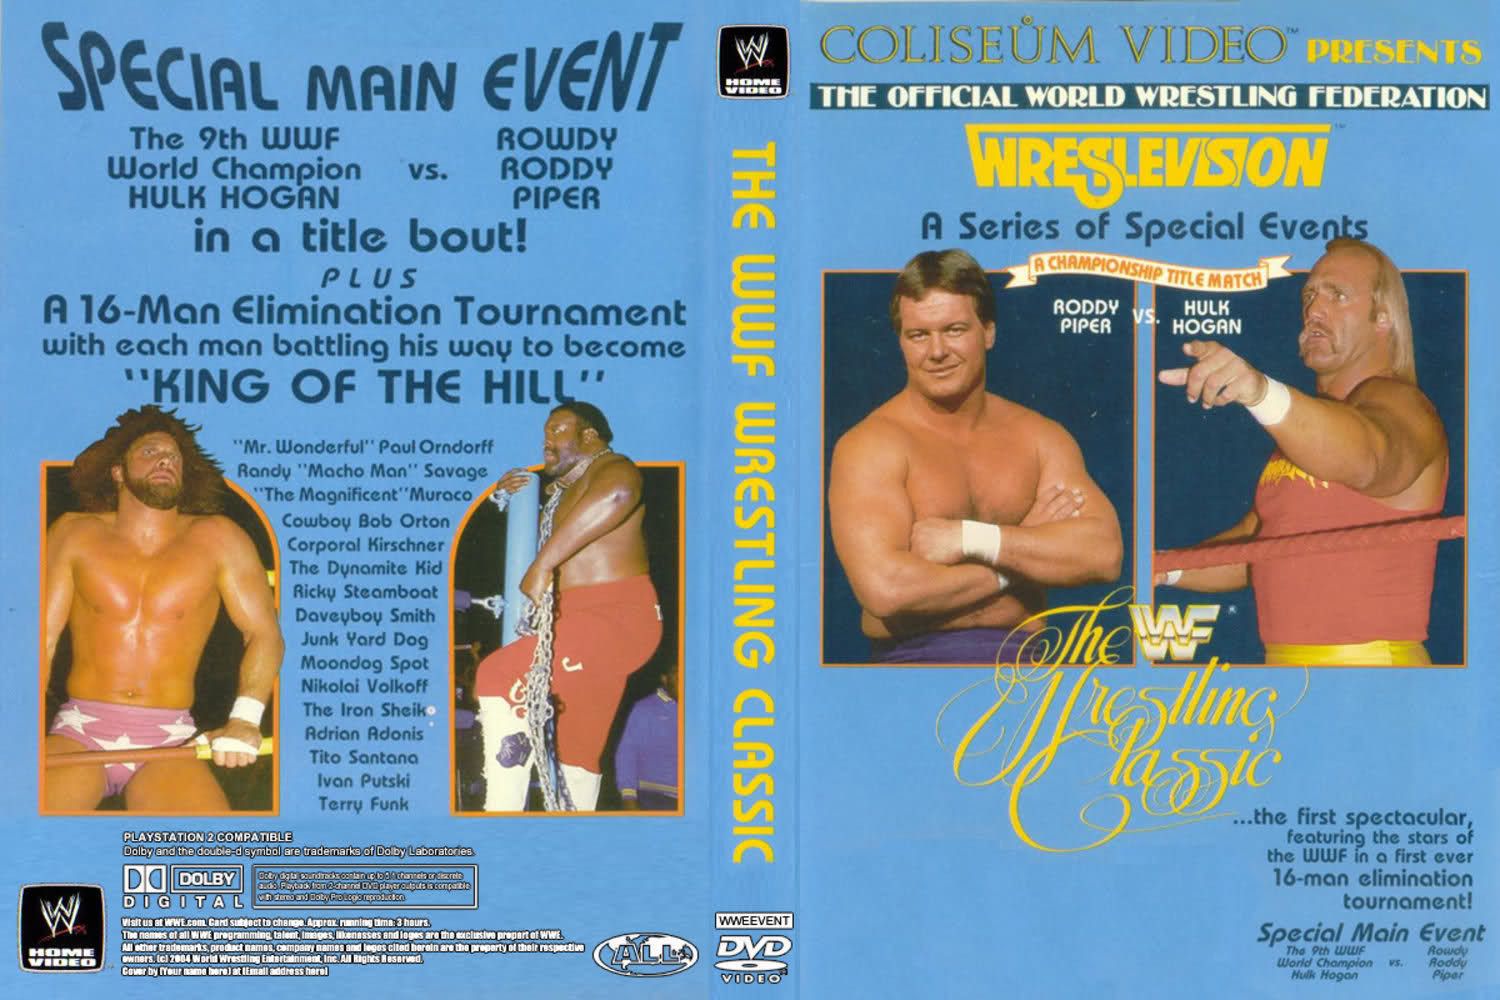 The Wrestling Classic DVD